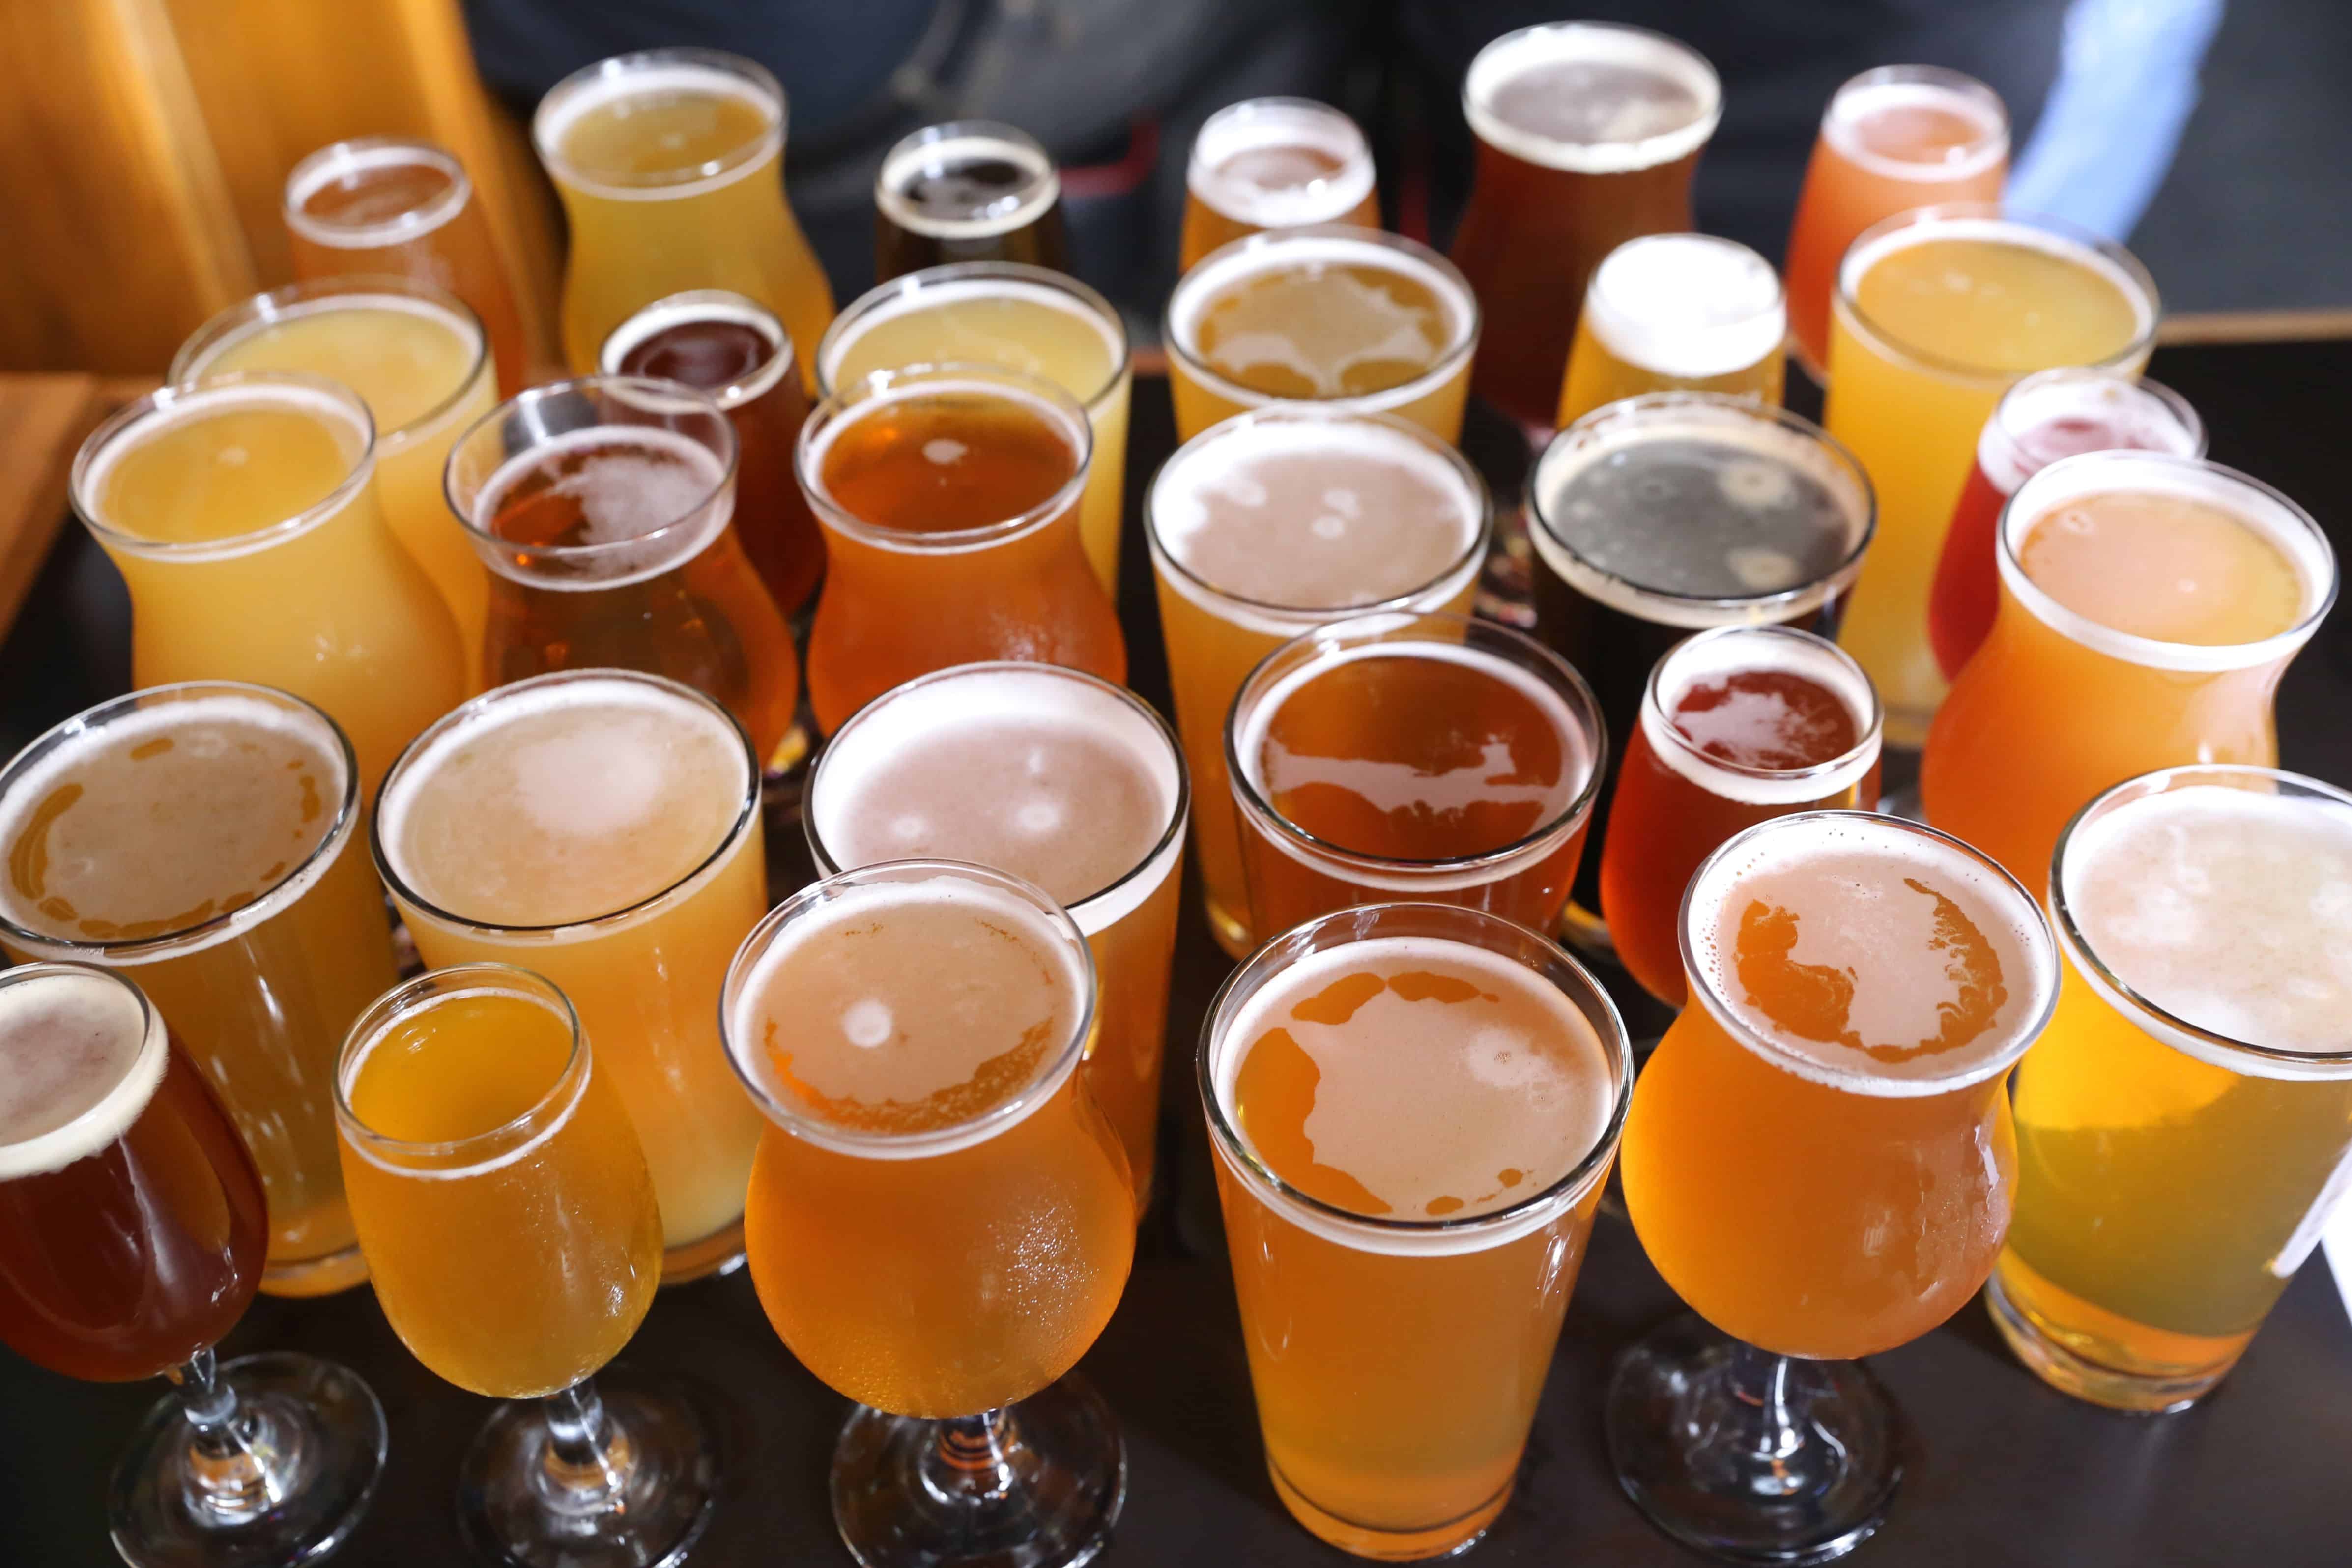 Assorted Craft Beer Varieties - IPA's, Stouts, Lagers, Sours and More